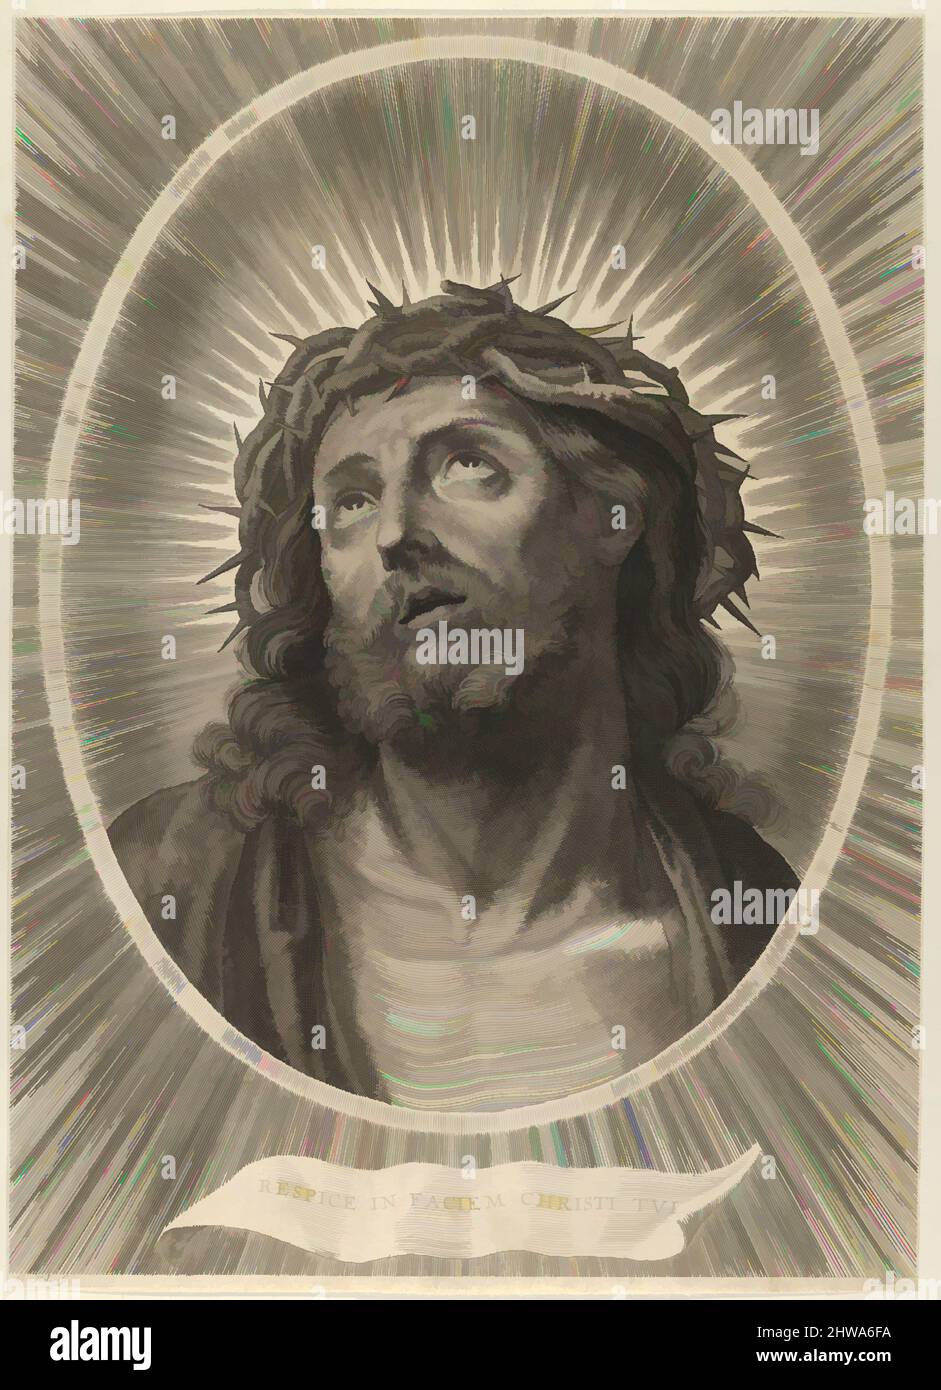 Art inspired by Drawings and Prints, Print, Head of Christ looking up with crown of thorns, in an oval frame, after Reni, Classic works modernized by Artotop with a splash of modernity. Shapes, color and value, eye-catching visual impact on art. Emotions through freedom of artworks in a contemporary way. A timeless message pursuing a wildly creative new direction. Artists turning to the digital medium and creating the Artotop NFT Stock Photo